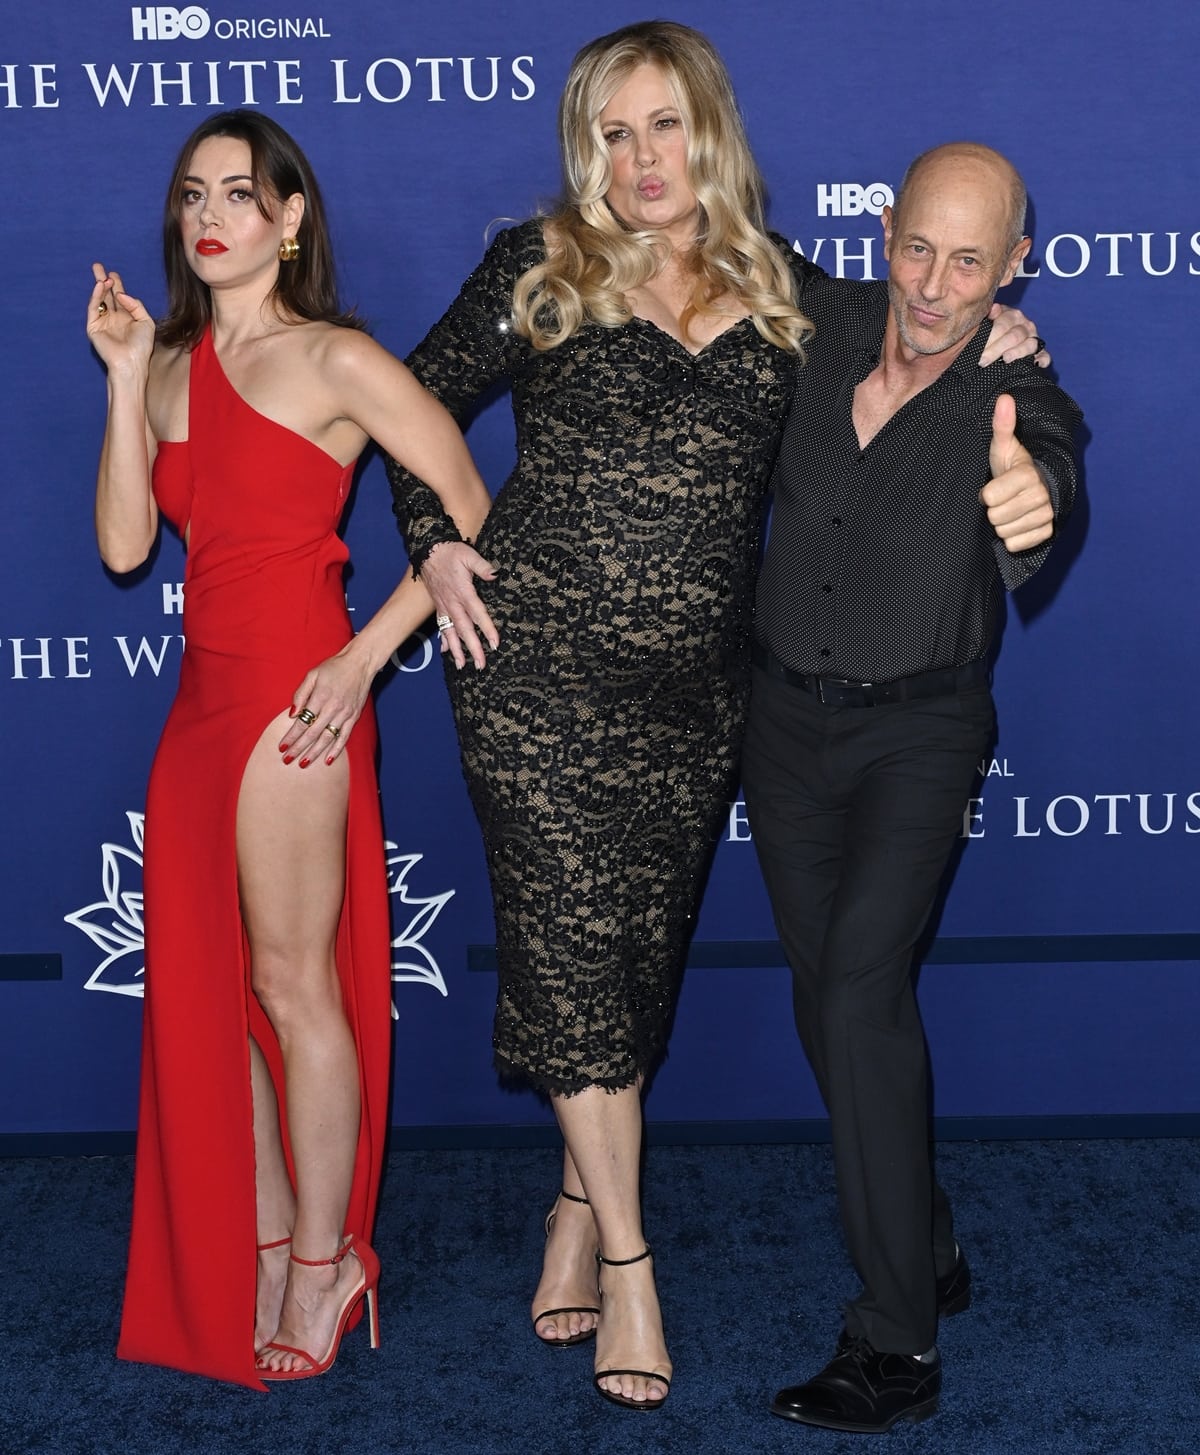 Aubrey Plaza in Monot, Jennifer Coolidge in Dolce&Gabbana, and Jon Gries attend the Los Angeles Season 2 Premiere of the HBO Original Series "The White Lotus"